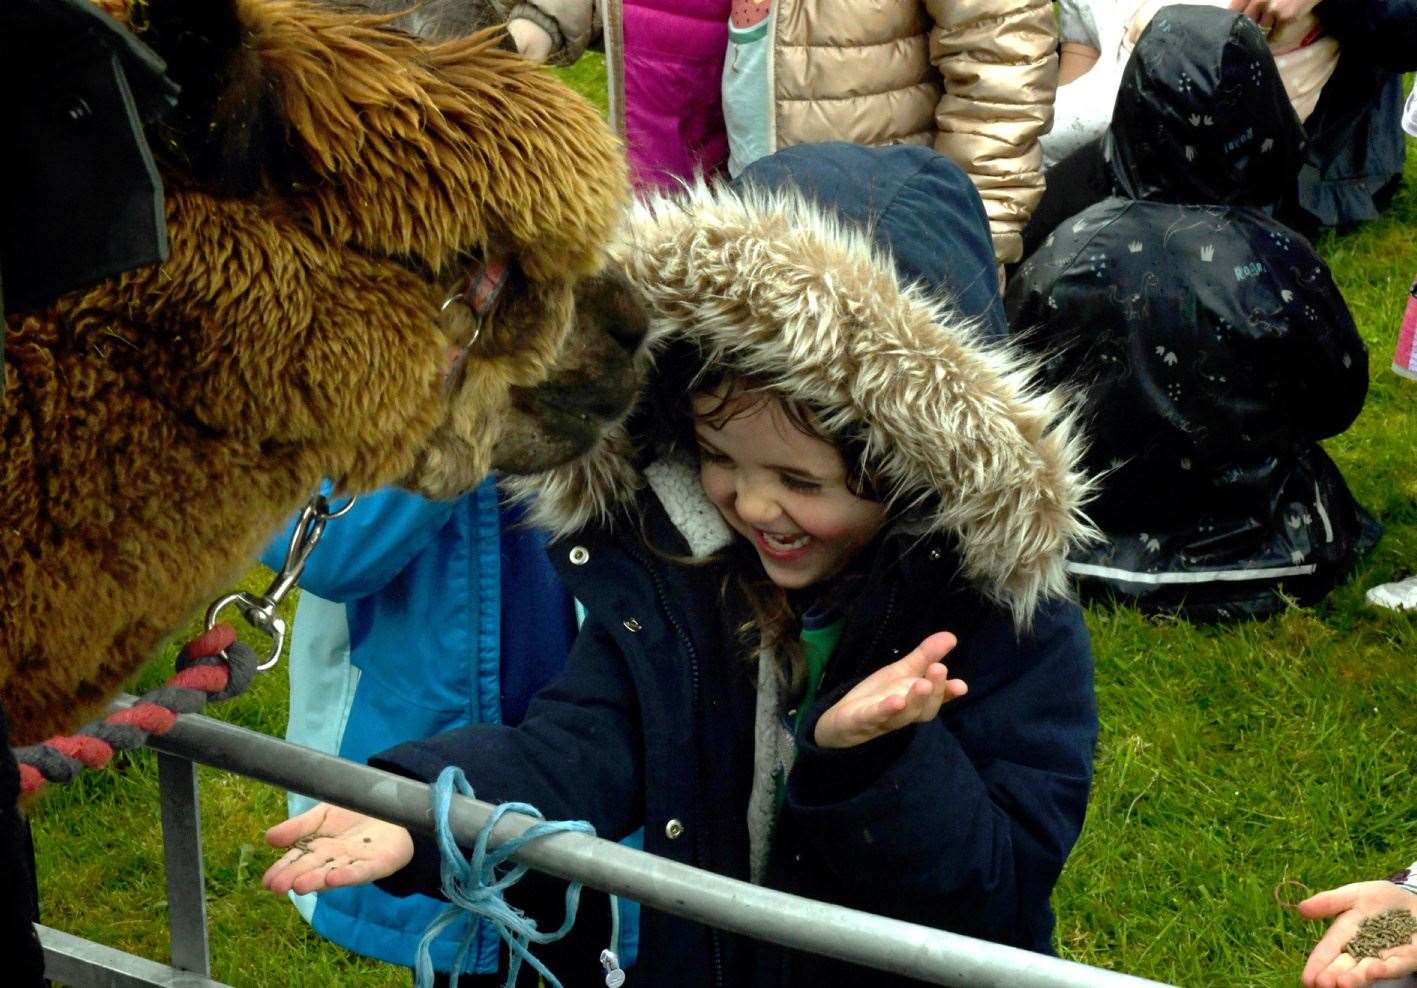 Feeding the alpacas was safe as alpacas naturally lack front teeth at the front of their upper jaw. Picture: James Mackenzie